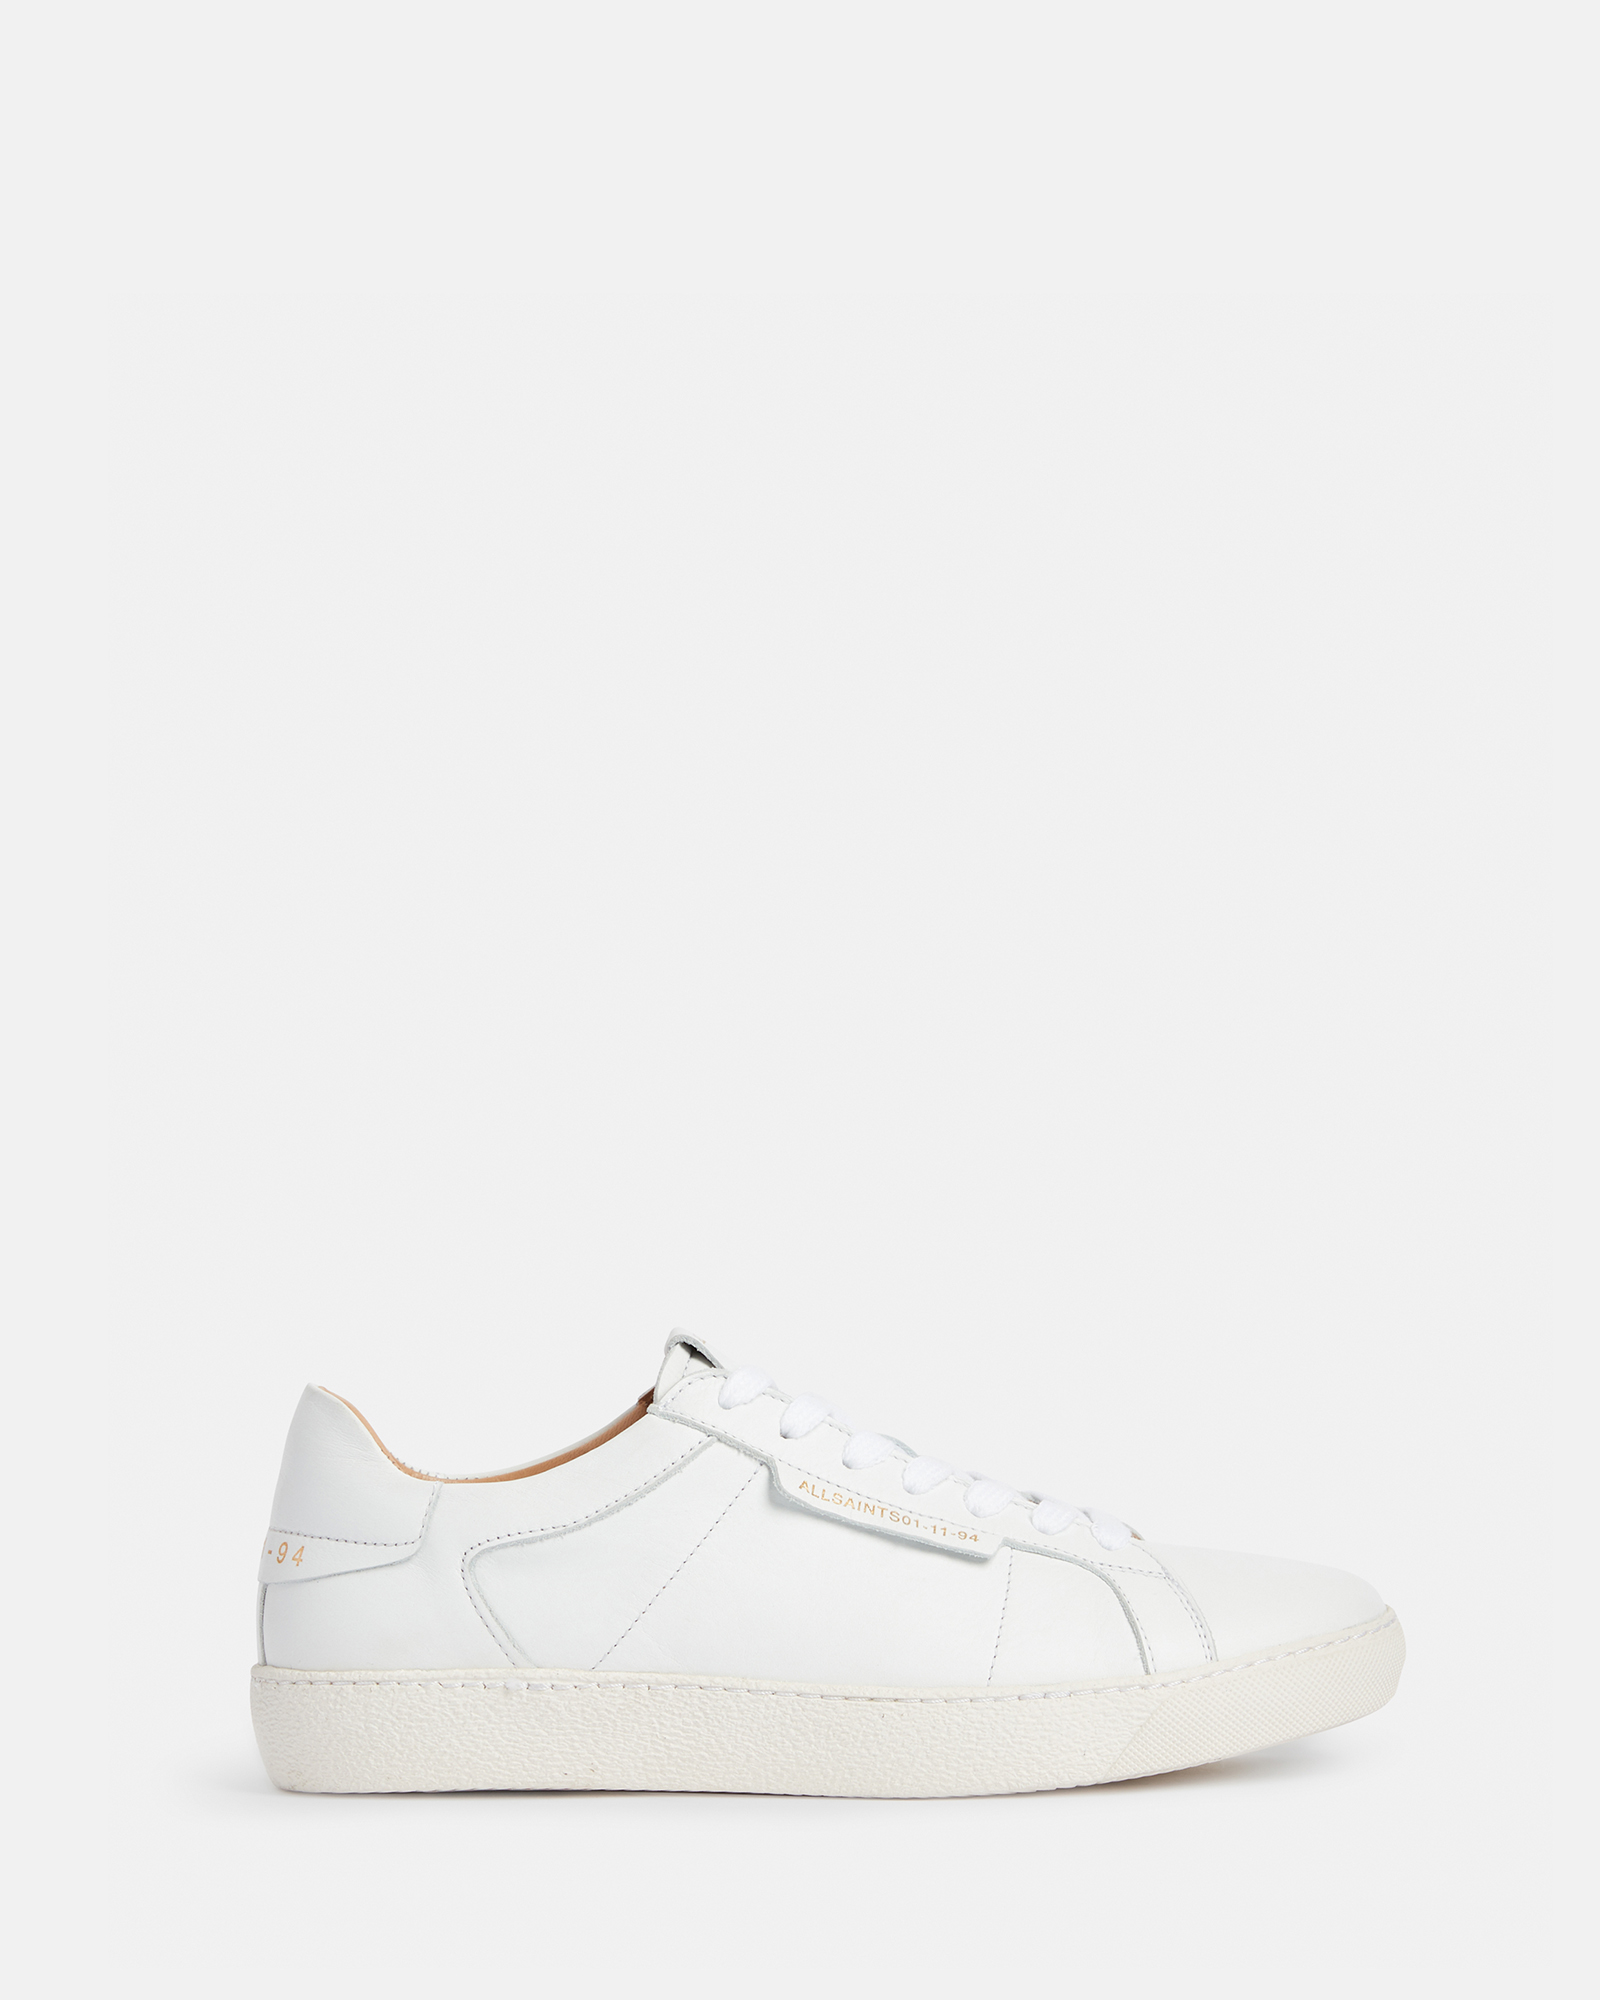 AllSaints Sheer Round Toe Leather Trainers,, White